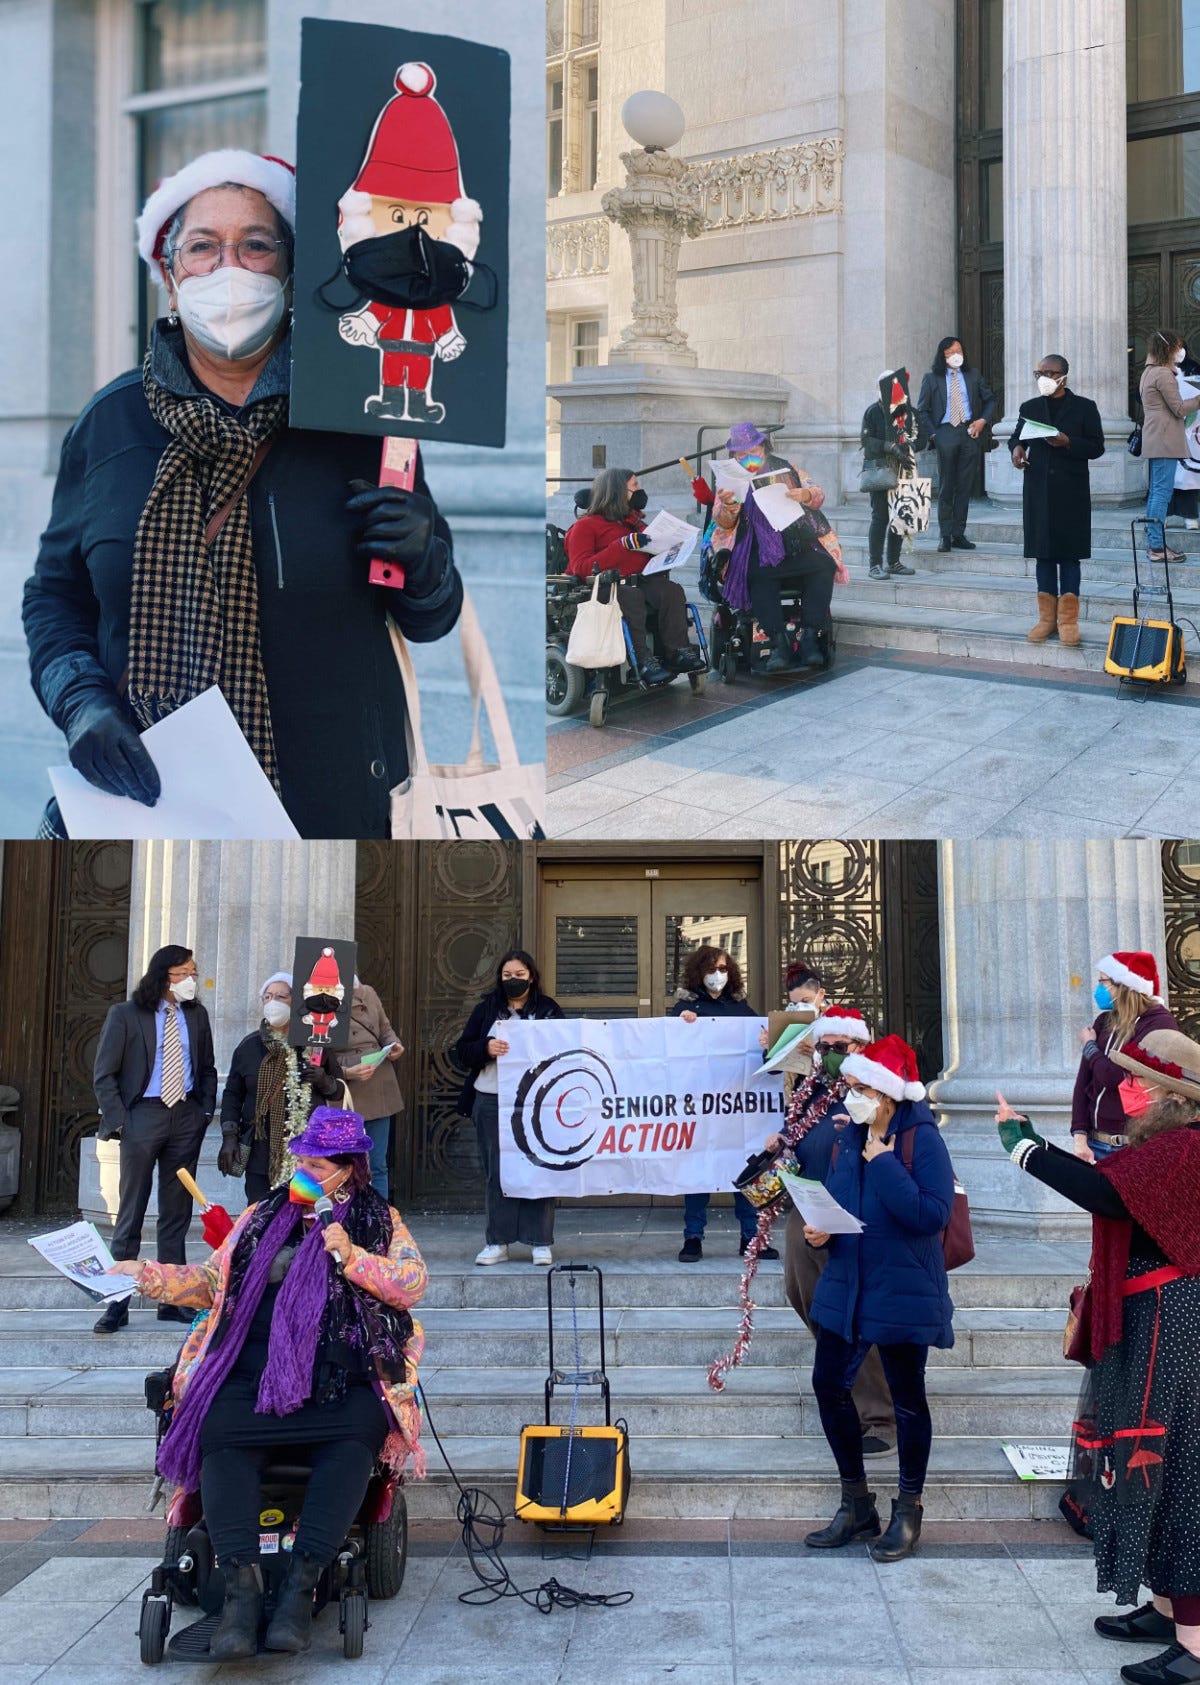 Picture is a collage of 3 photos. One photo is of a woman wearing a Santa hat, gloves scarf, and a white N95 mask. She is holding in one hand some papers, in her other hand she is holding a picket sign which is a picture of an adorable cartoon style Santa elf with cotton puffs as sideburns and he’s wearing a red Santa hat with a cotton puff as the tassel and he’s also wearing a black N95 mask. The second picture is of several people on the front stone steps of Oakland city hall with greek style architecture and pillar. There are people standing and using wheelchairs and holding papers in their hand, they are all wearing masks. The third picture is of more people from a different angle in front of Oakland city hall on the stone steps with pillars, and in this picture everyone is wearing N95s and several are wearing Santa hats and holding sets of papers. and in the picture you can see a banner that says Senior and Disability Action with the SDA logo which is a wedge marker drawn set of 2 black circles around an inner red circle. 